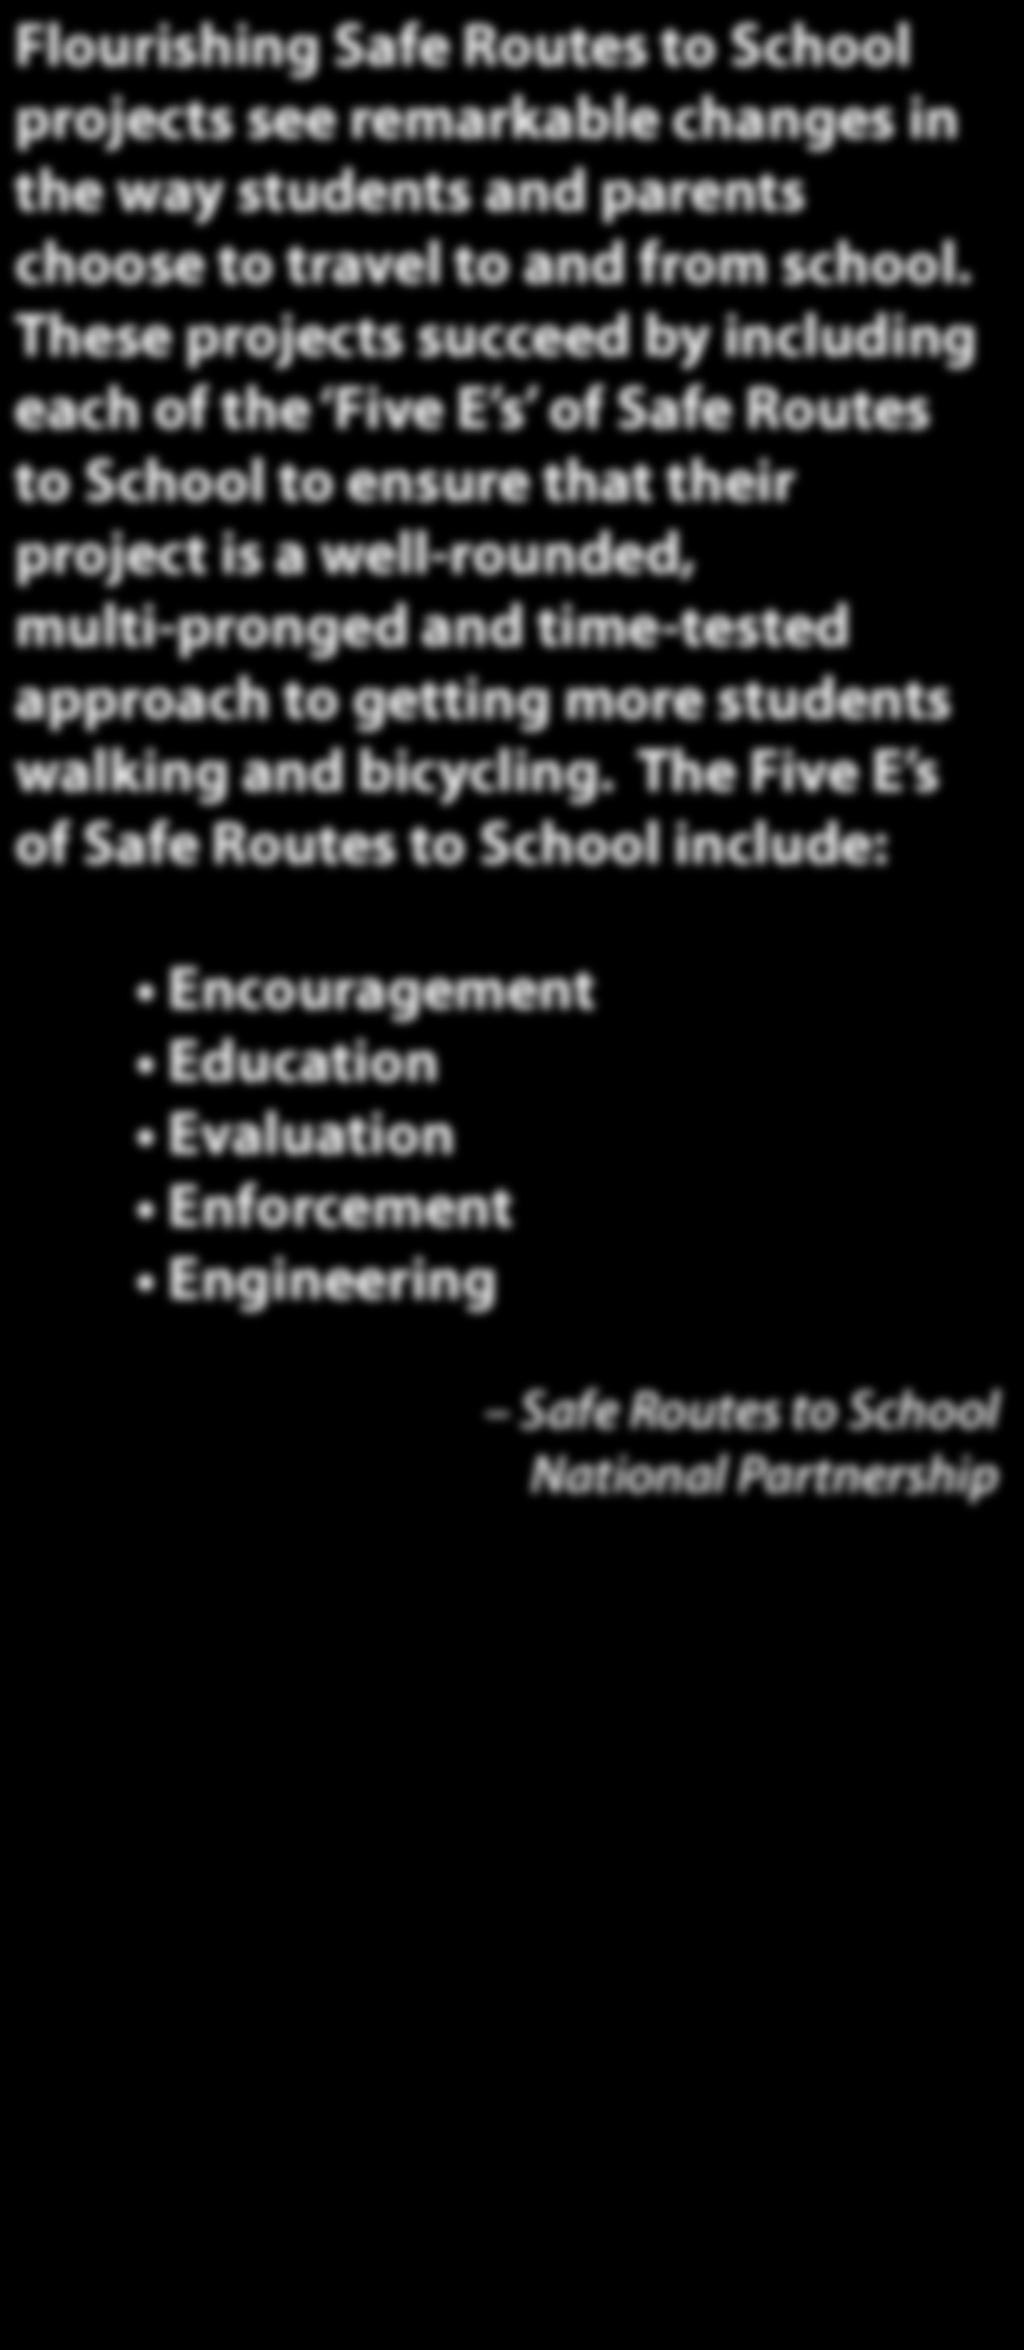 These projects succeed by including each of the Five E s of Safe Routes to School to ensure that their project is a well-rounded,